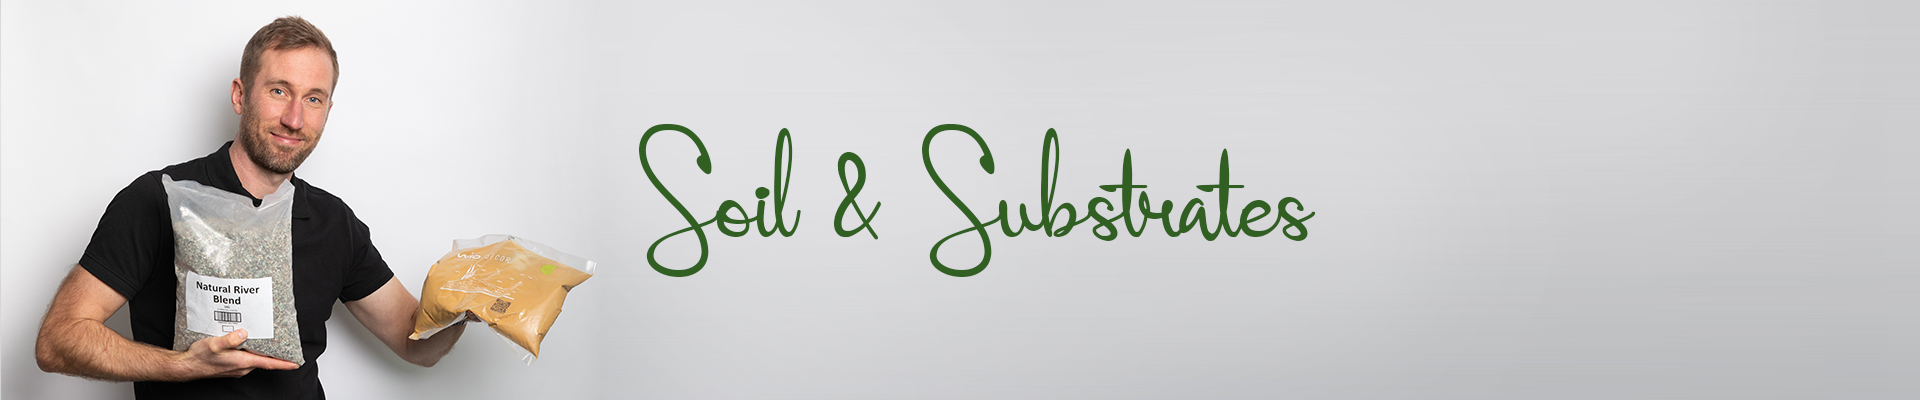 Soil & substrates